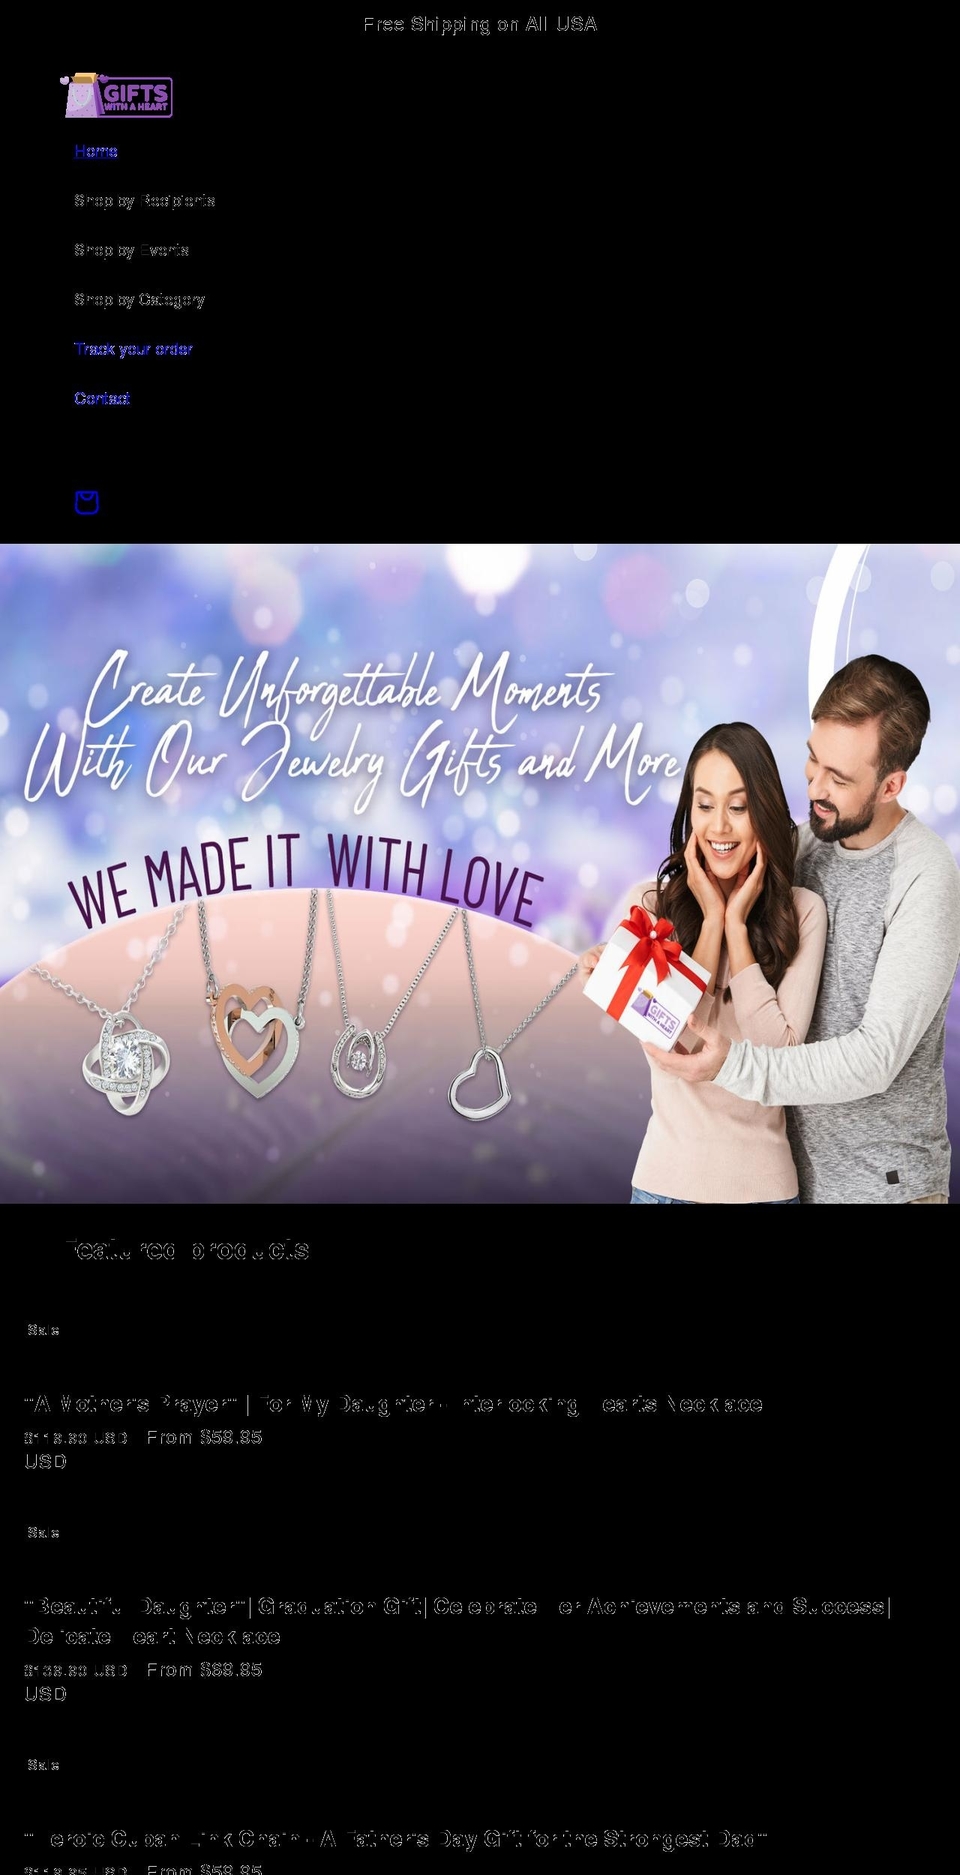 Gifts Shopify theme site example giftswithaheart.com